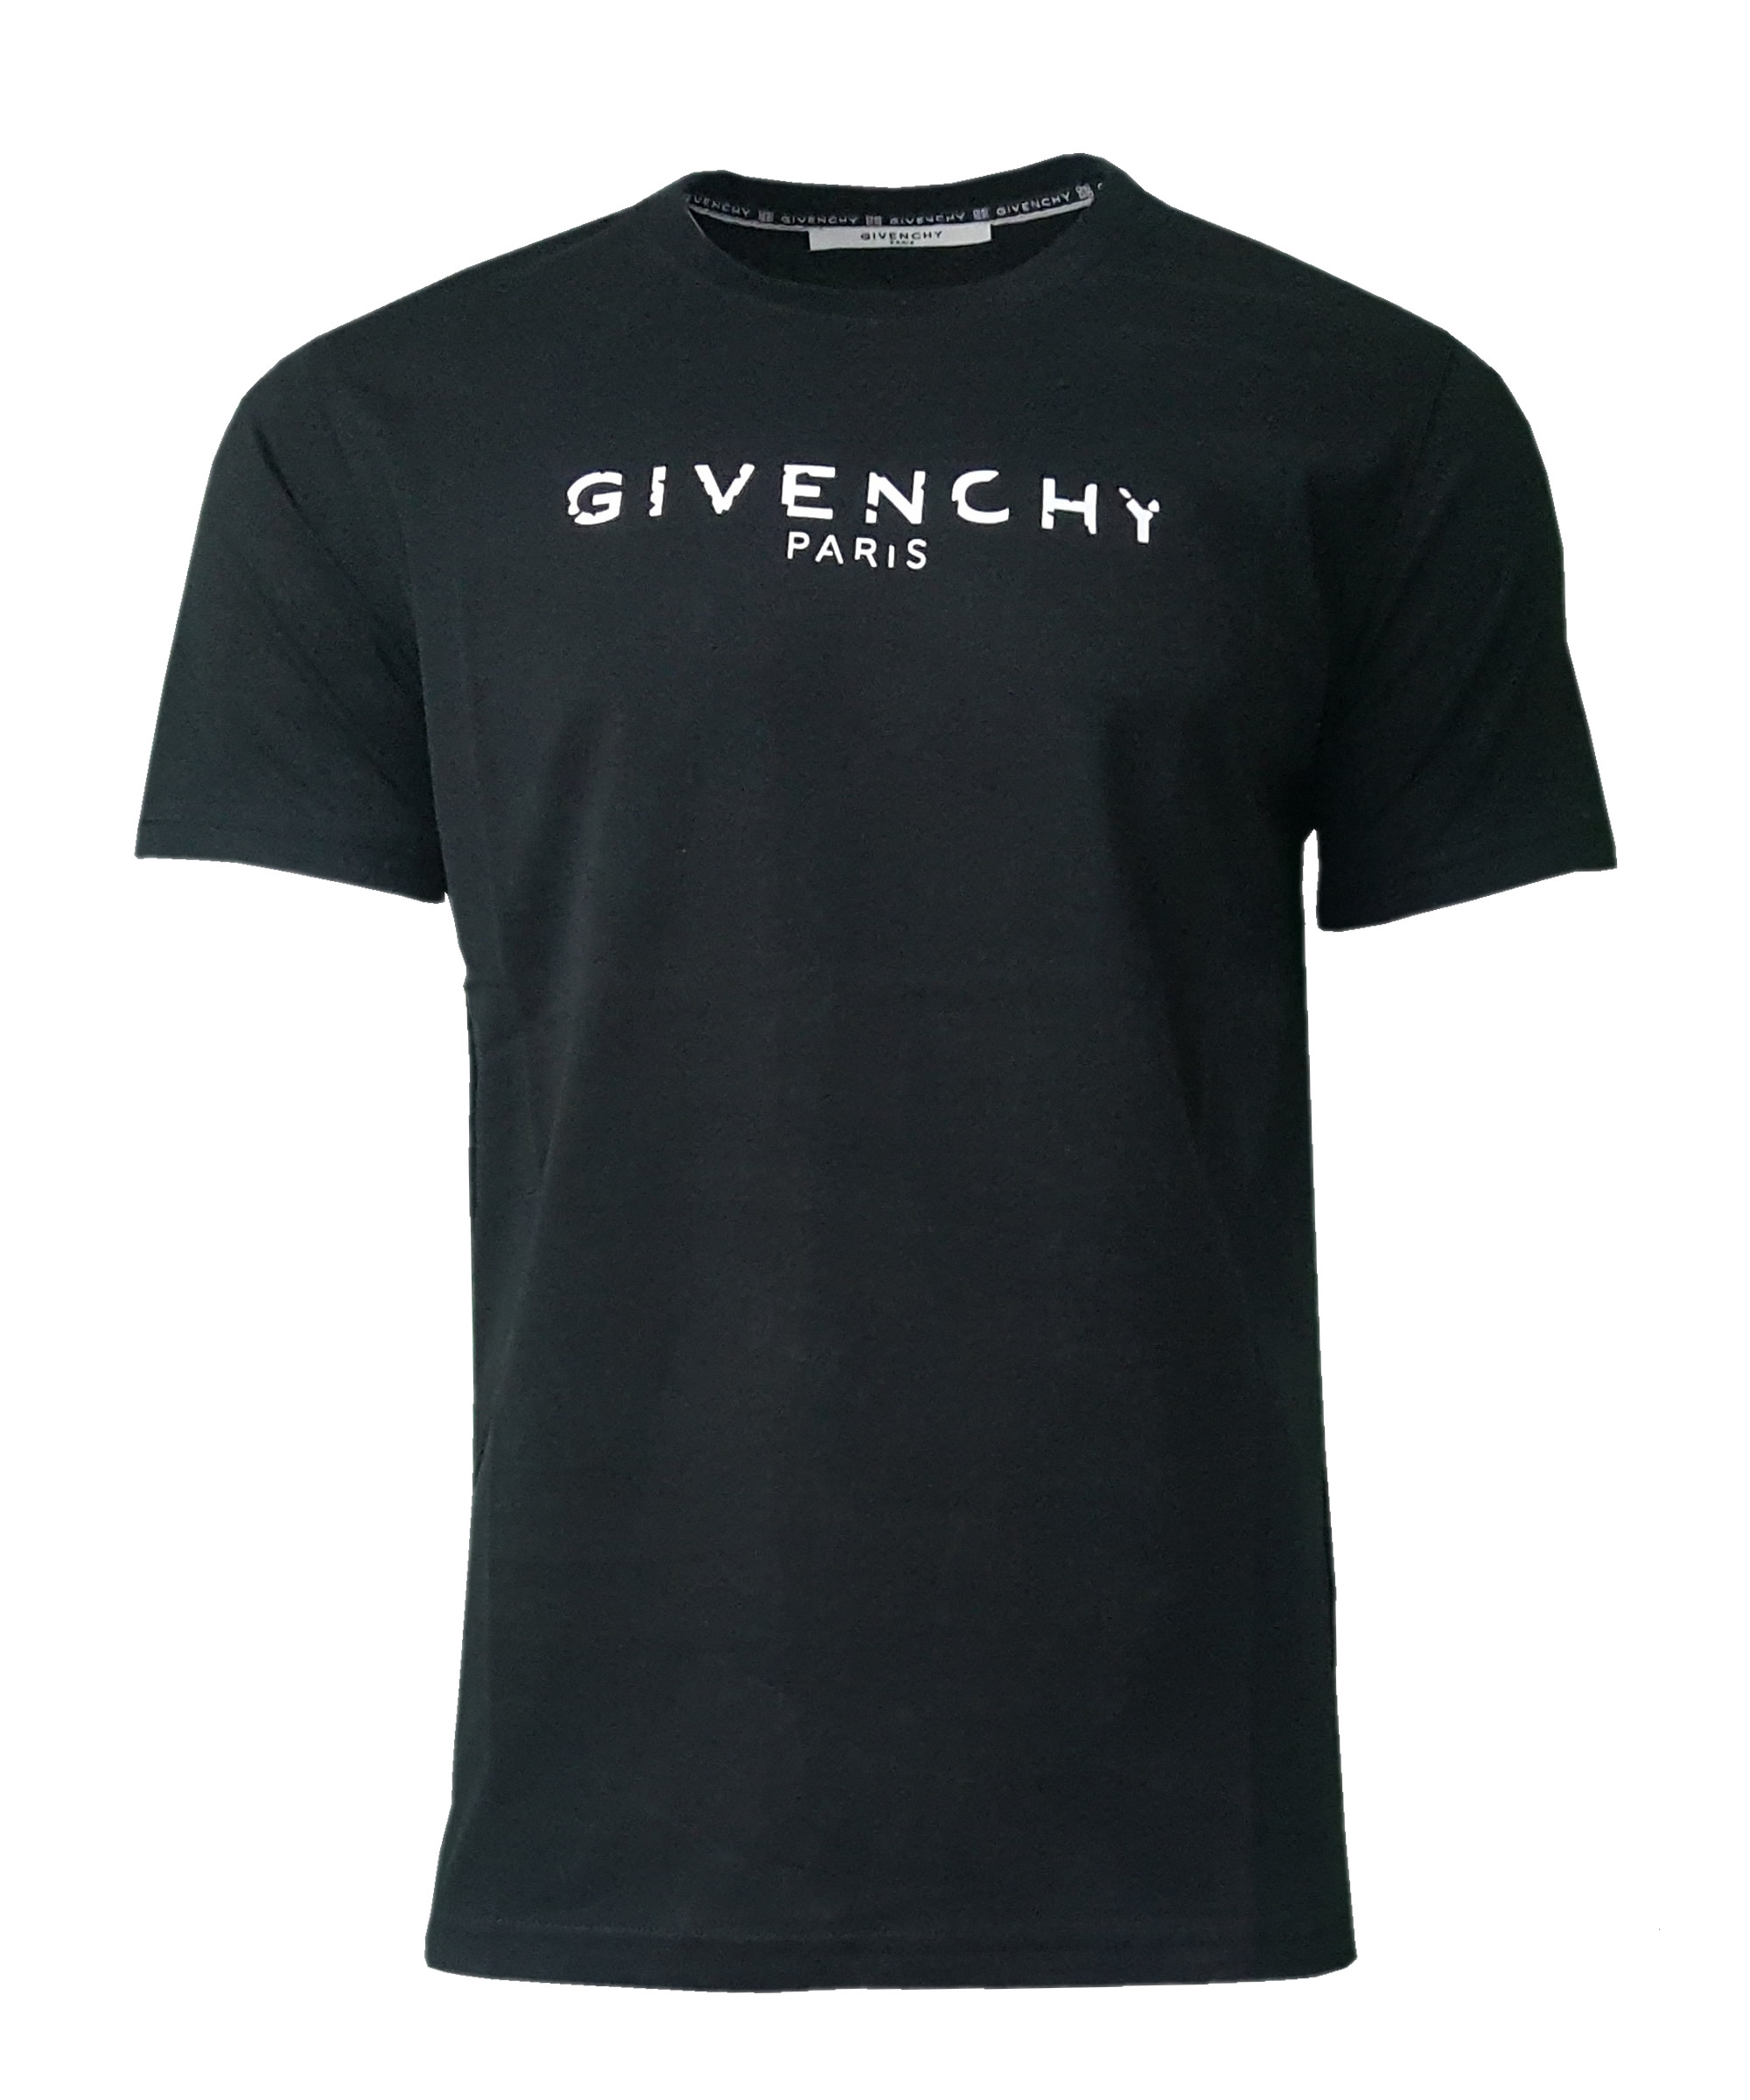 Givenchy Paris Short Sleeve Crew T Shirt. Distressed Print in Black -  INTOTO7 Menswear